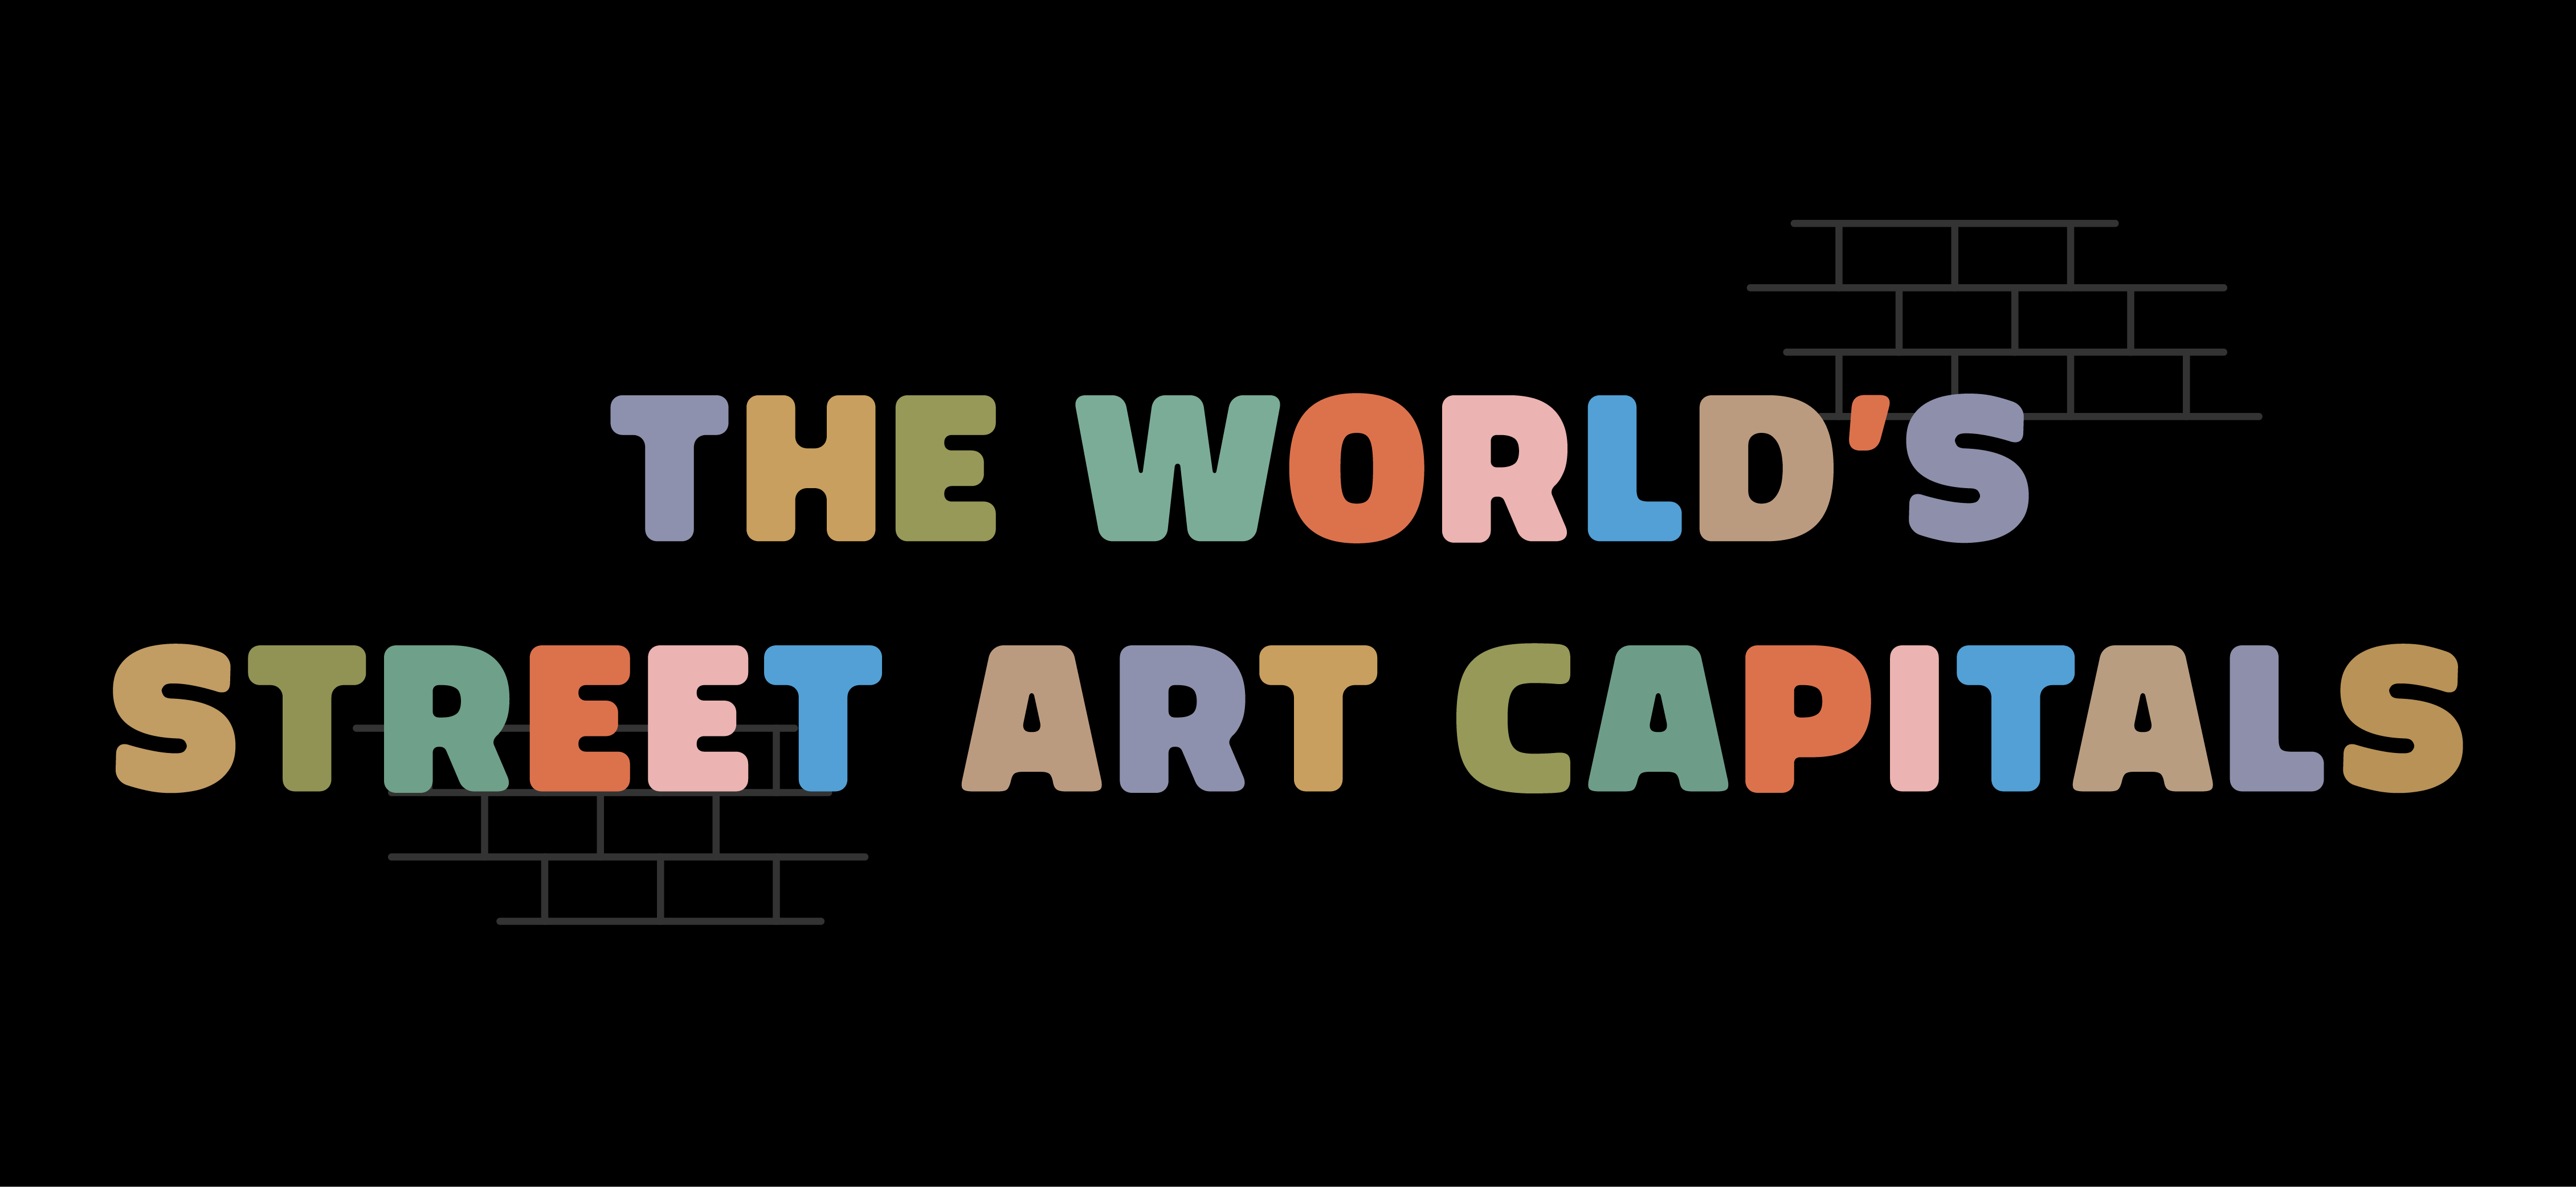 The Street Art Capitals of the World